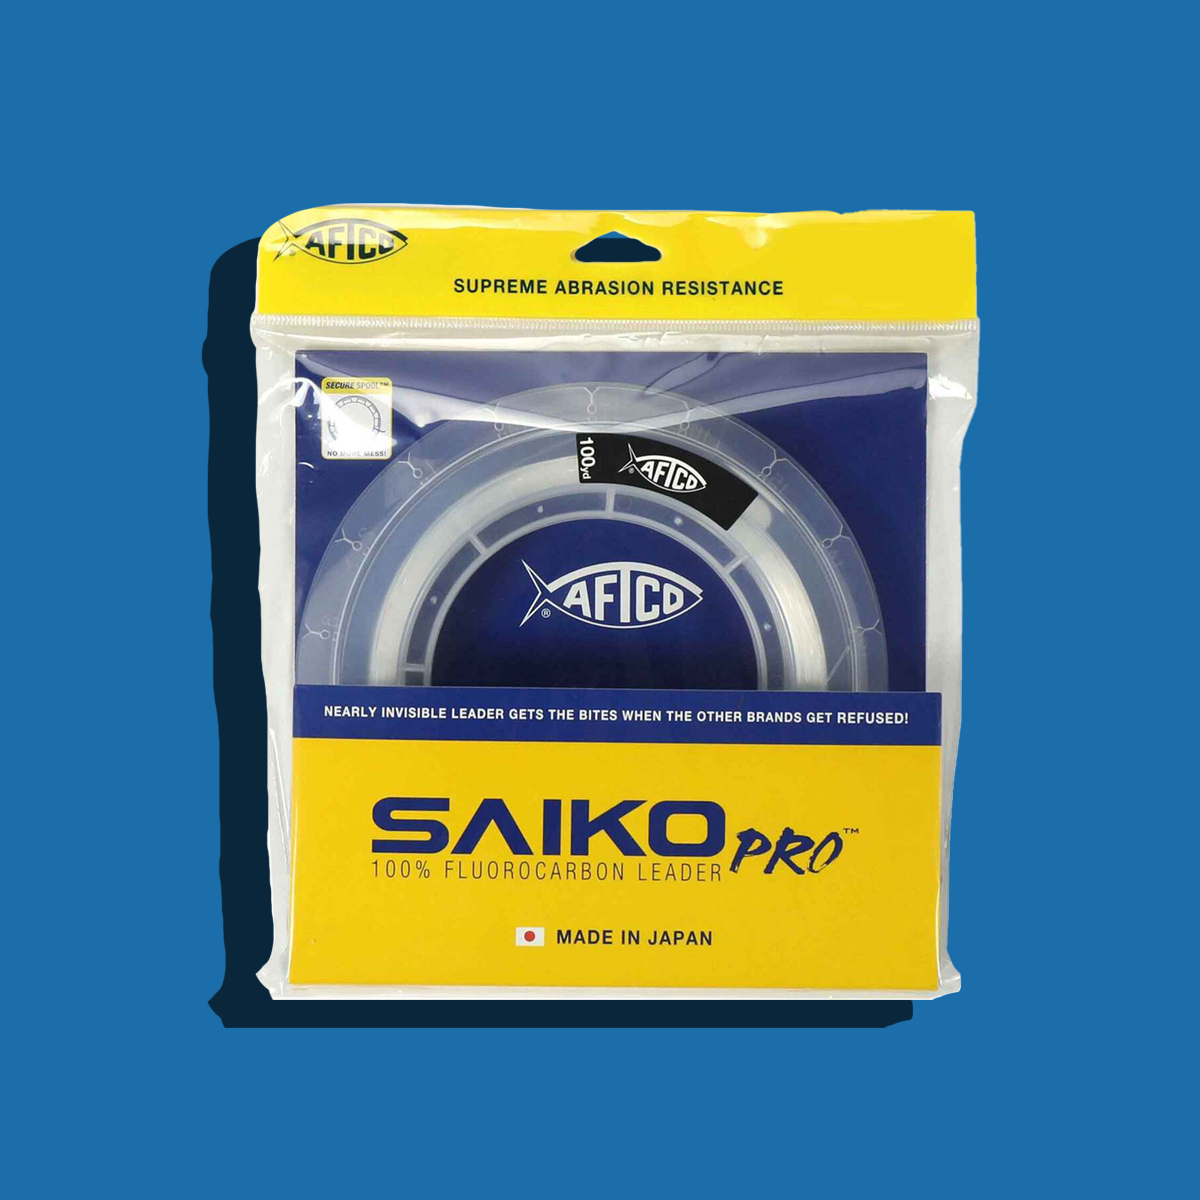 AFTCO Saiko Pro 100% Fluorocarbon Leader, 100 Yard / Clear / 60